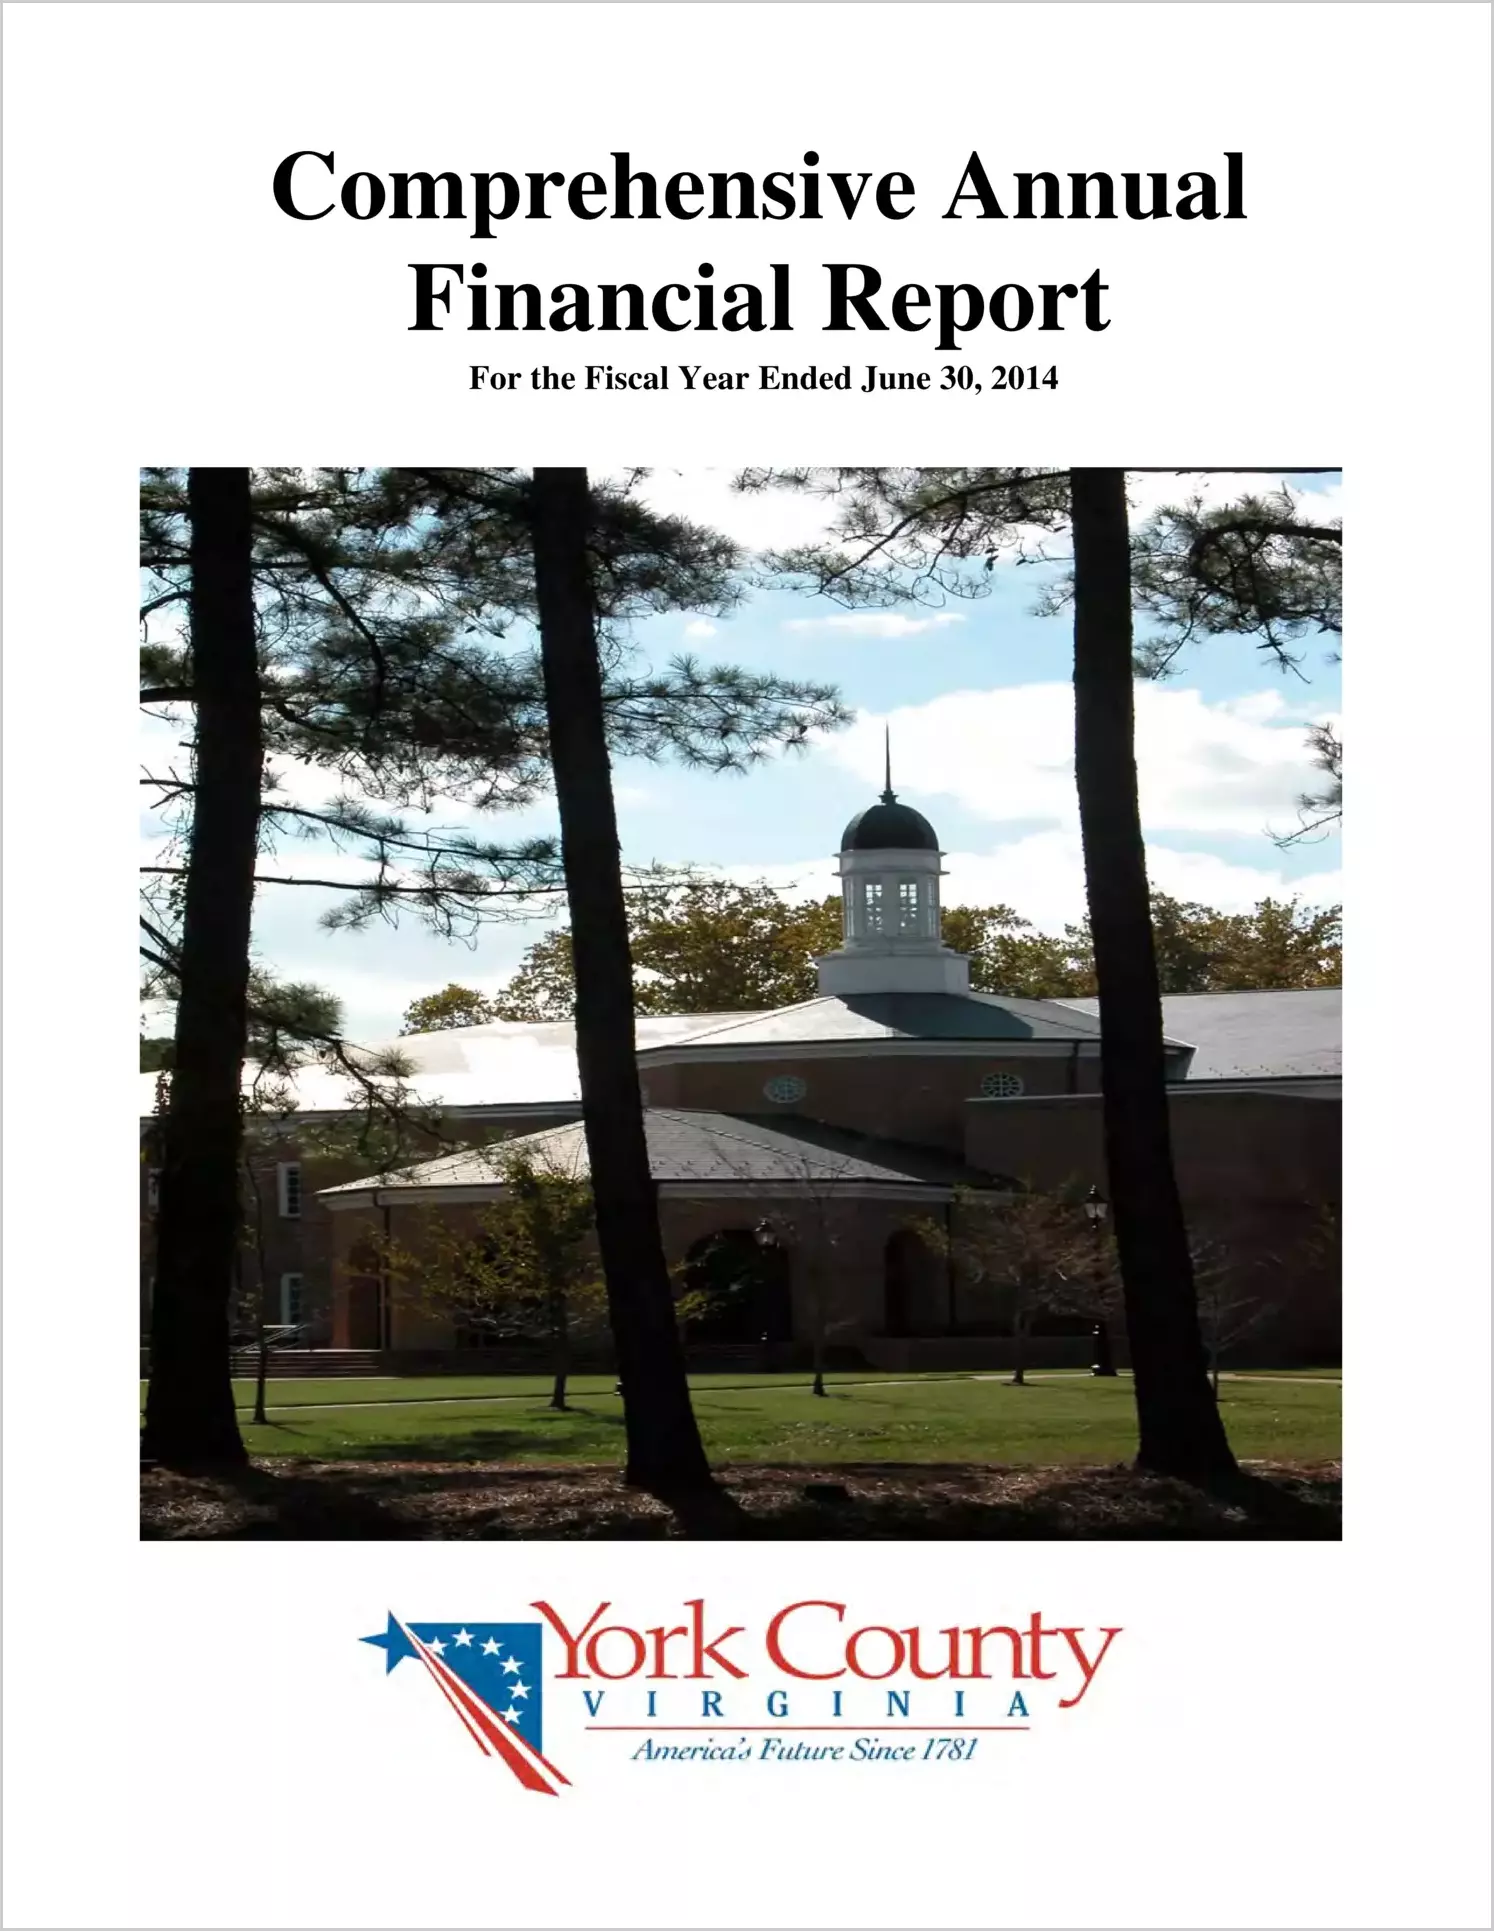 2014 Annual Financial Report for County of York